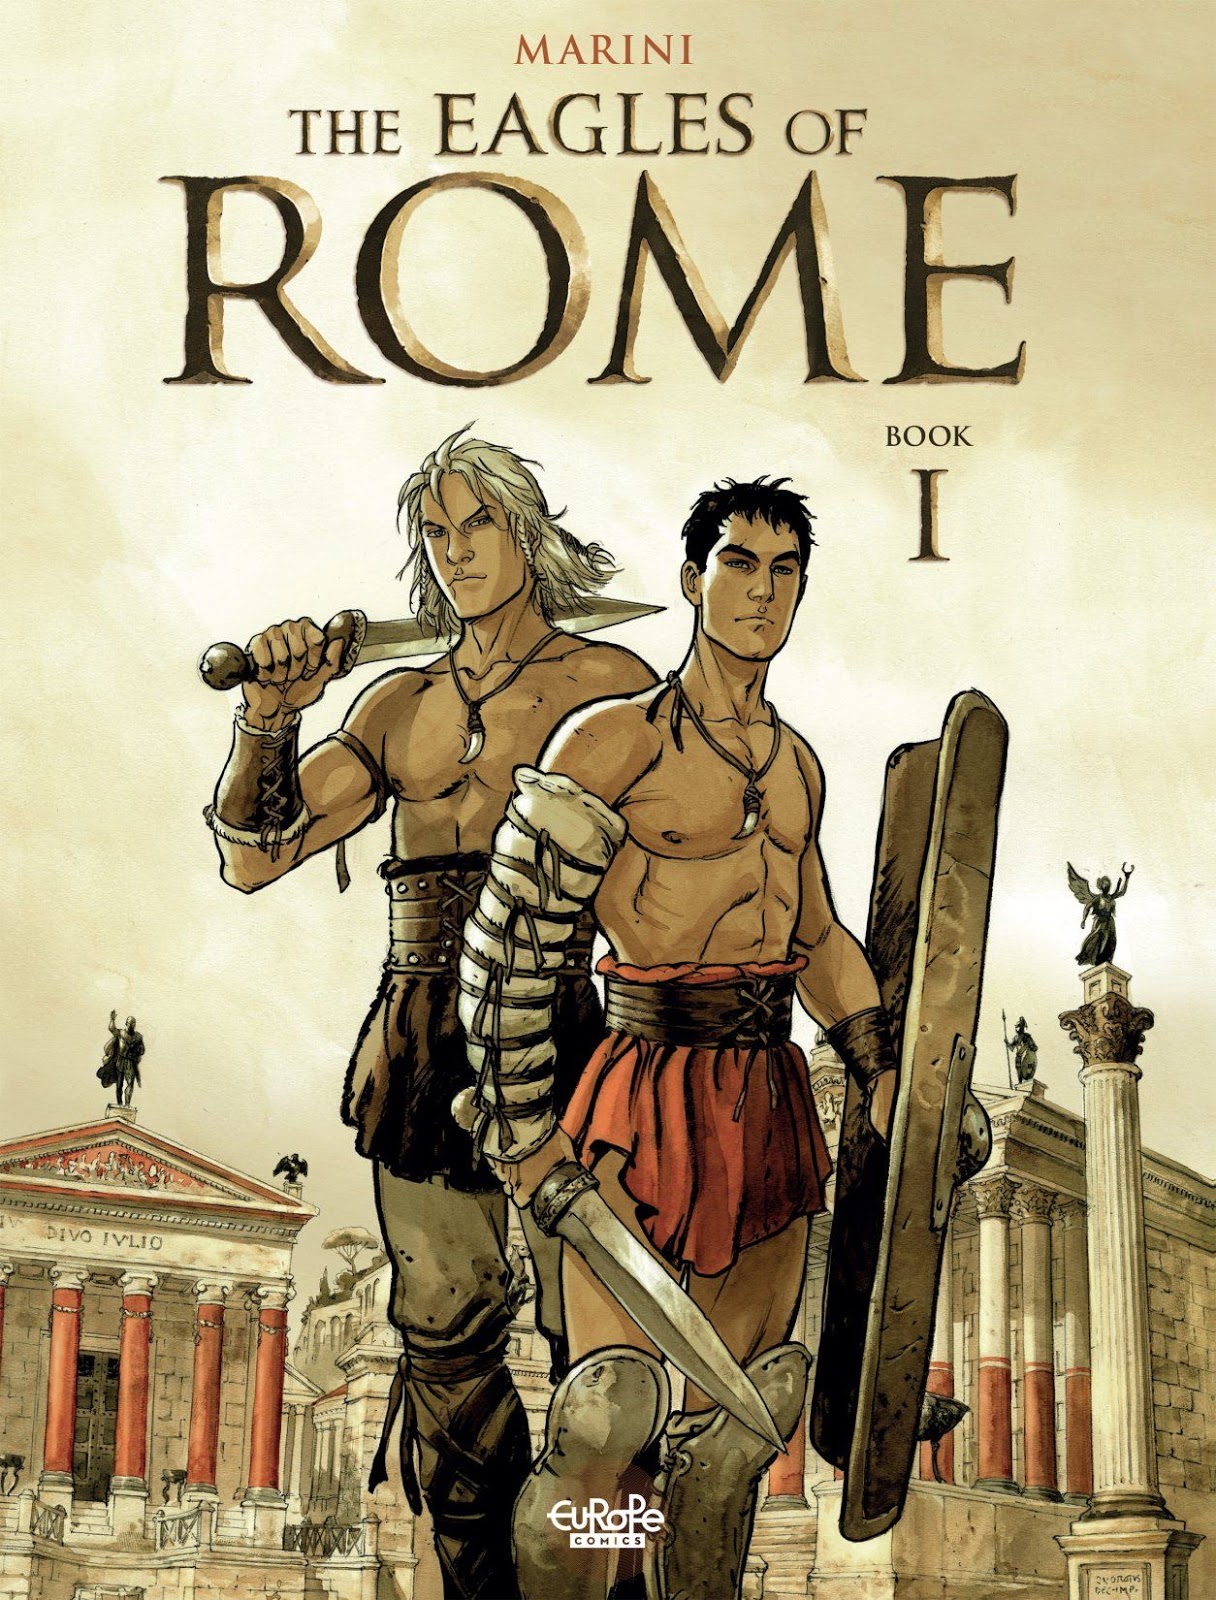 The Audiophile : Comic Review: The Eagles of Rome by Enrico Marini